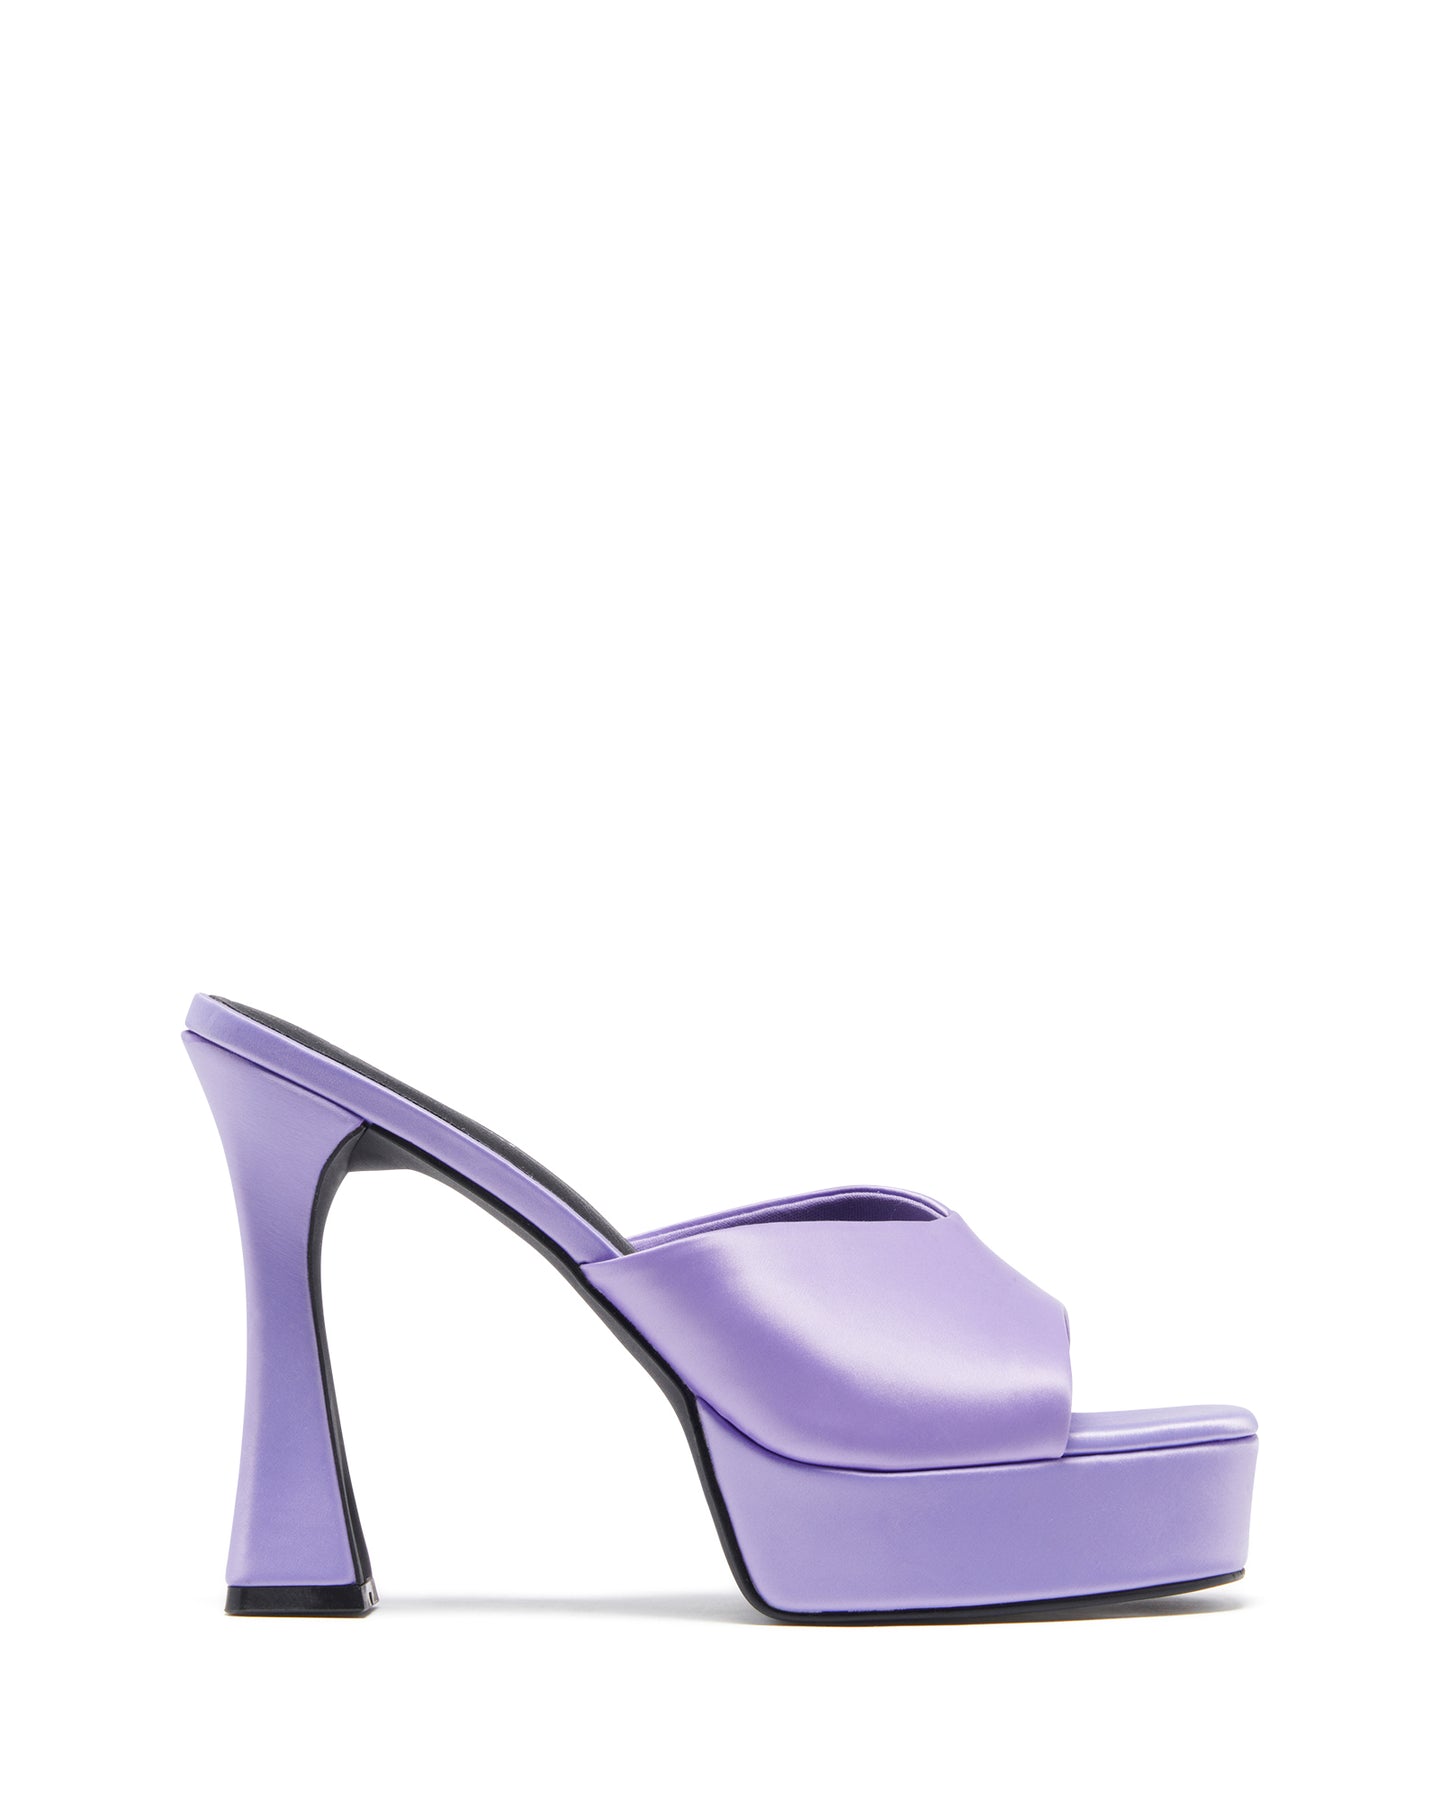 Spring Lilac Pu Square Toe Mesh Lace up Heels | Lace up sandal heels, Lace  up heels, Heels